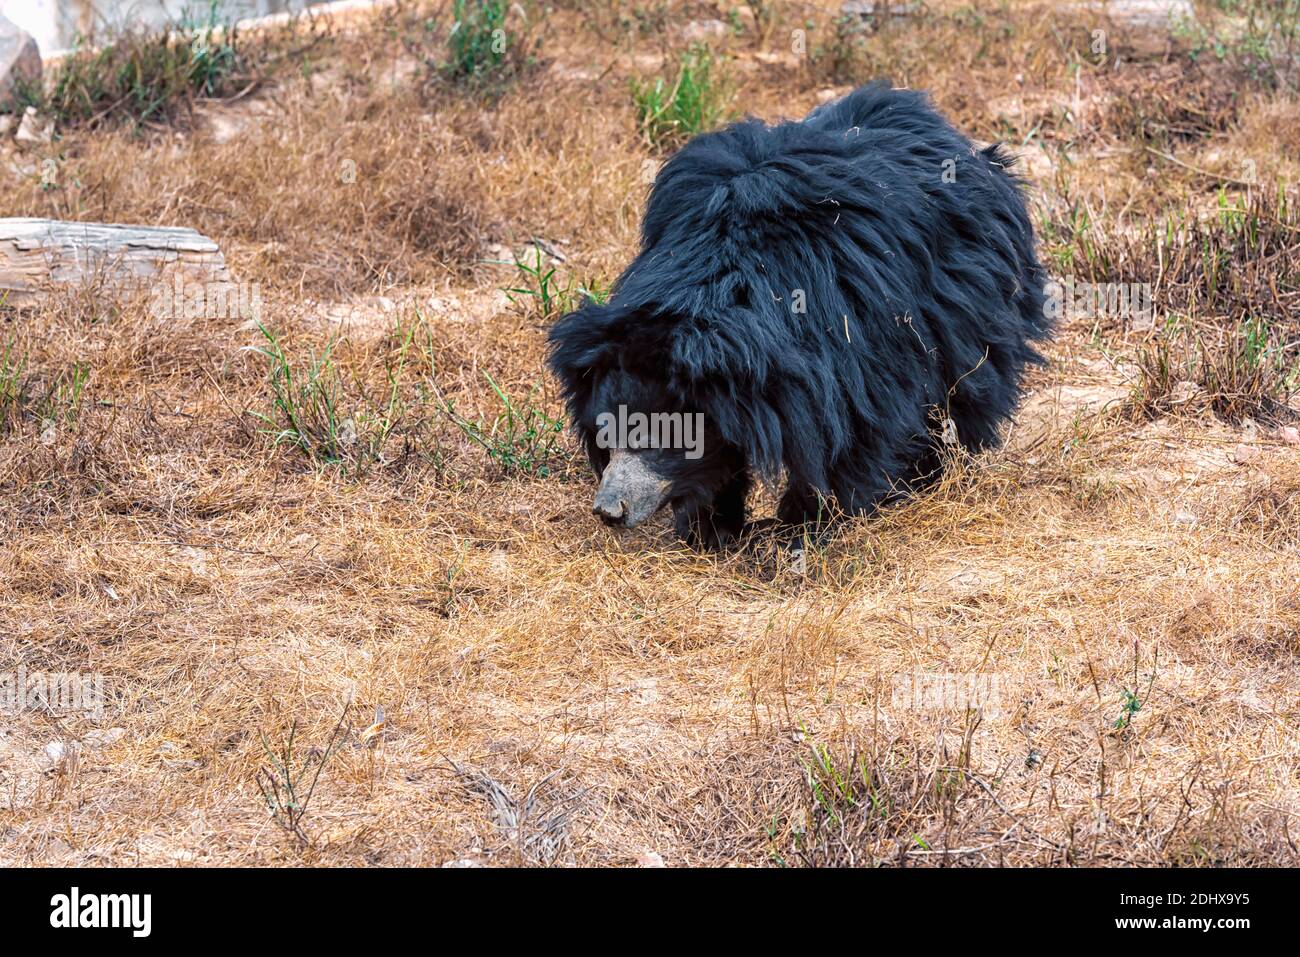 An Asiatic Black Bear on a lonely stroll inside an enclosure at the National Zoological Park Delhi, also known as the Delhi Zoo. Stock Photo